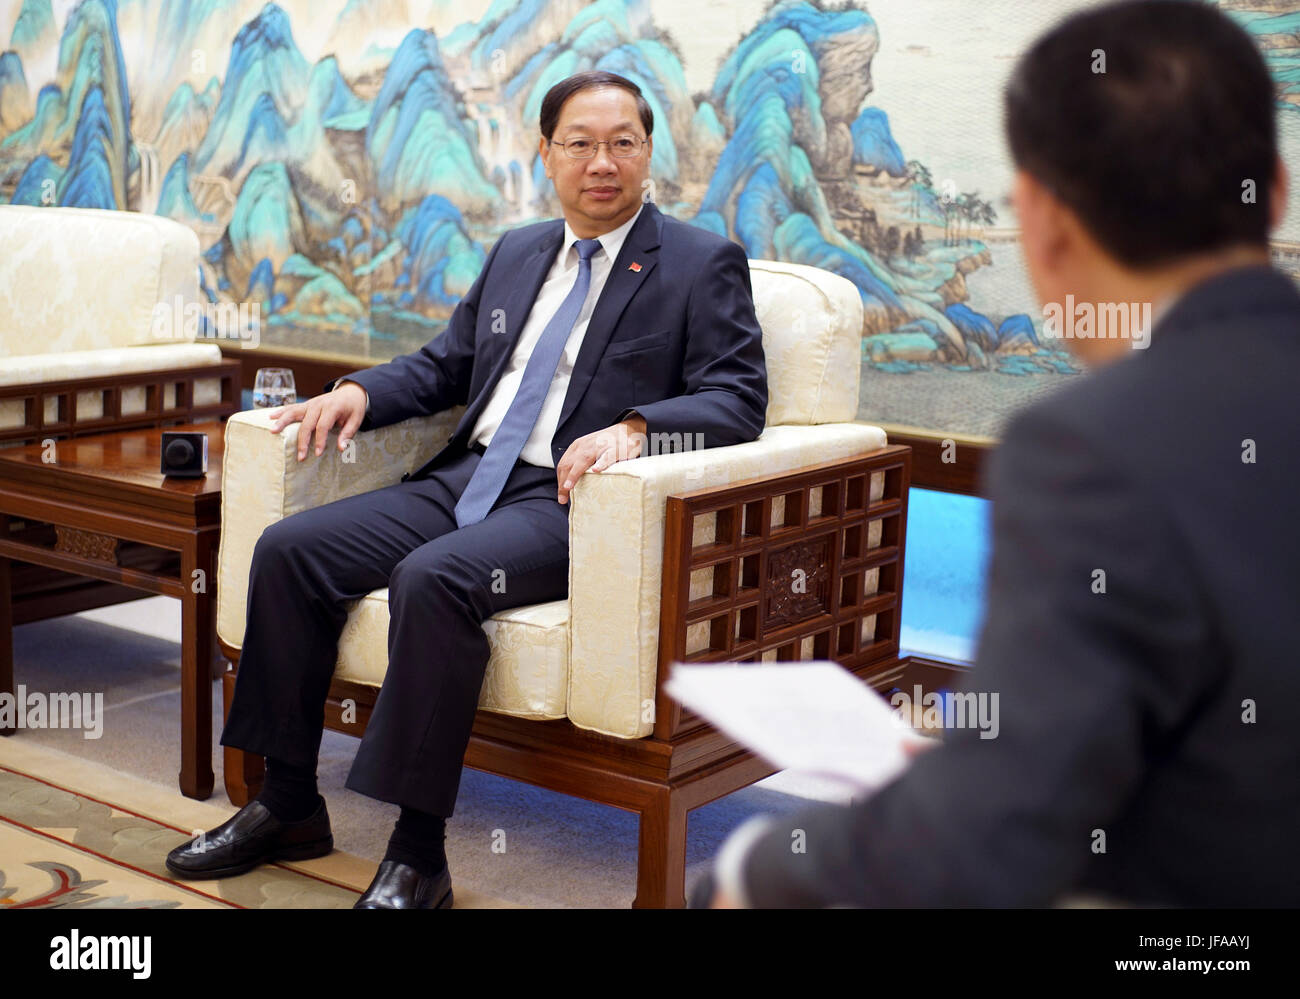 (170630) -- BERLIN, June 30, 2017 (Xinhua) -- Chinese ambassador to Germany Shi Mingde receives an exclusive interview with Xinhua in Berlin, capital of Germany, on June 29, 2017. China hoped that the G20 Hamburg summit can build on the results of G20 Hangzhou summit last year, and make greater achievements in consensus on openness and cooperation among member states, Chinese ambassador to Germany Shi Mingde said Thursday. (Xinhua/Wang Qing) (jmmn) Stock Photo